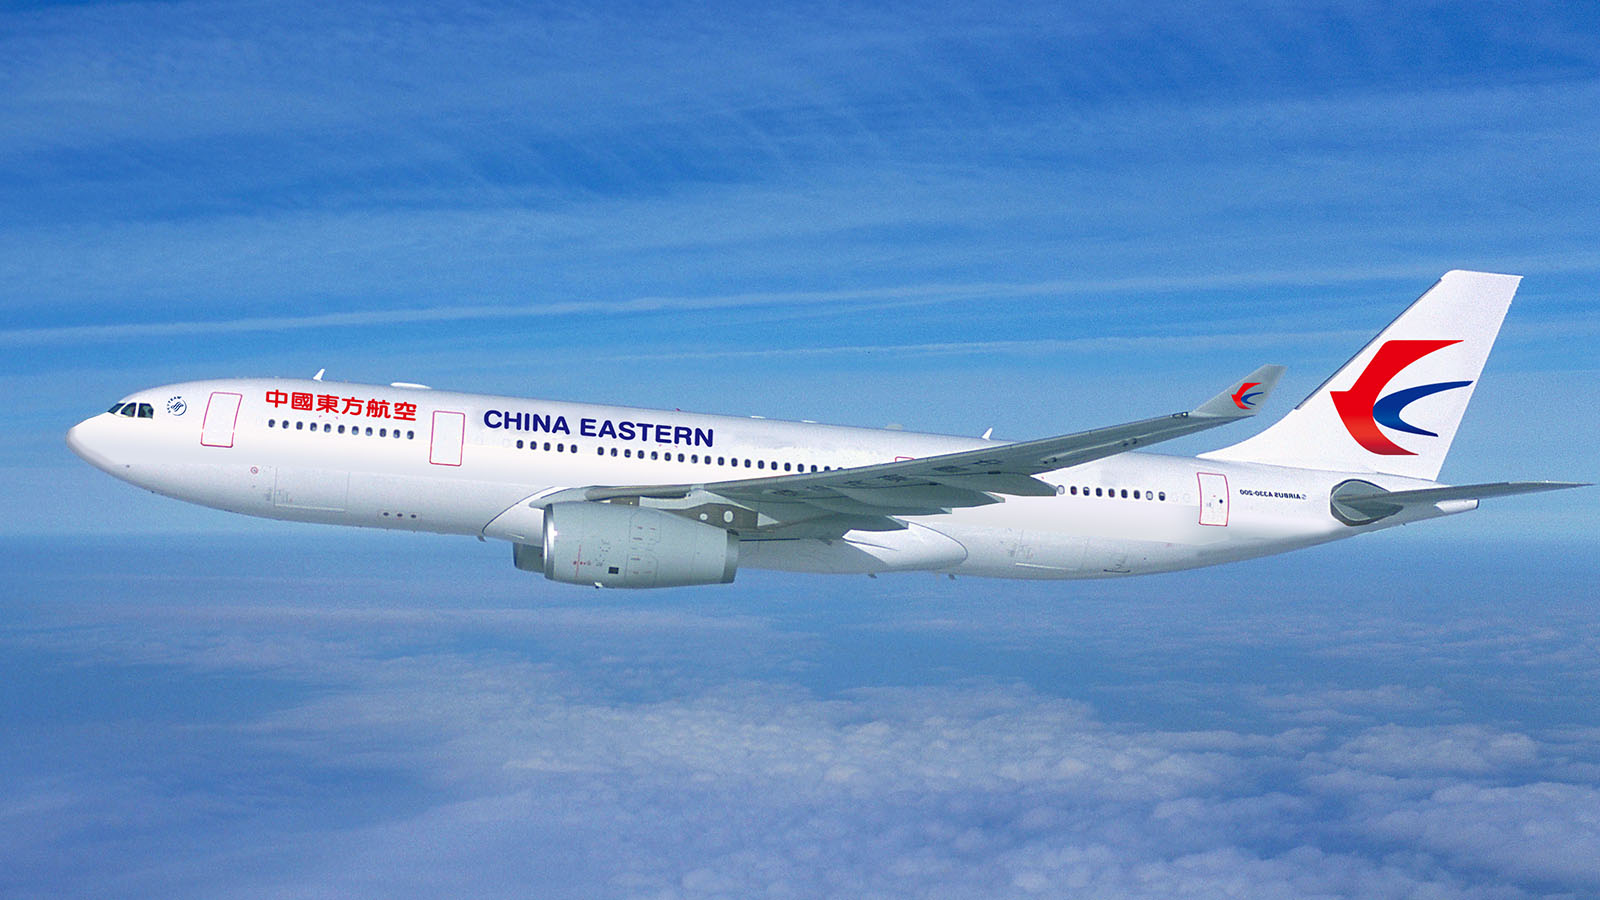 China Eastern's Airbus A330 jet offers Business and Economy